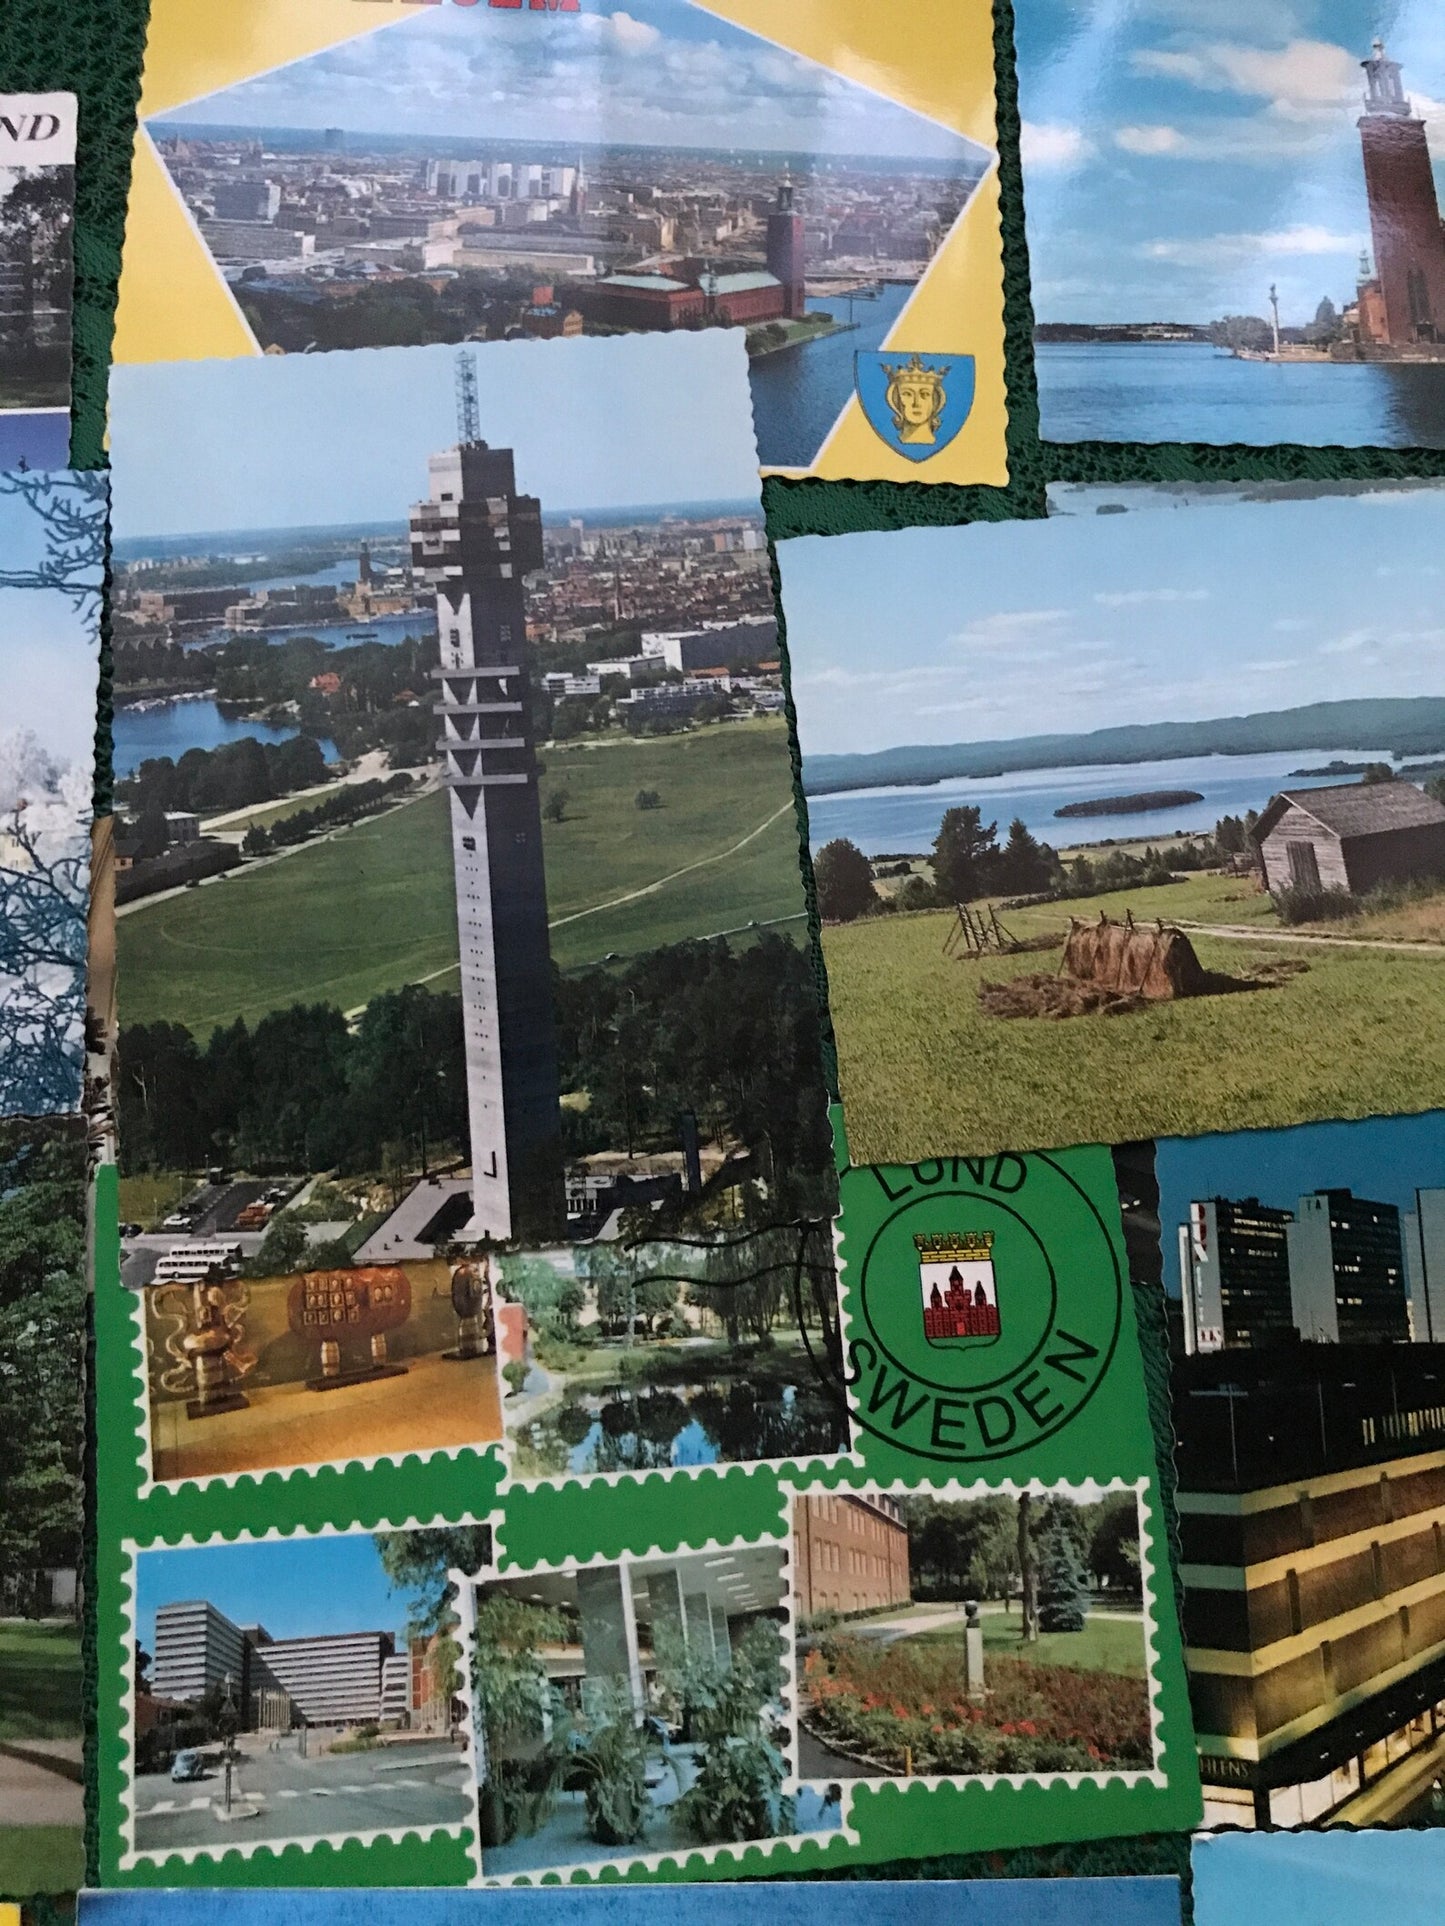 Set of 15 SWEDEN postcards from 2000s - Stockholm, Lund, Dalarna - Nordic Postcrossing viewcards